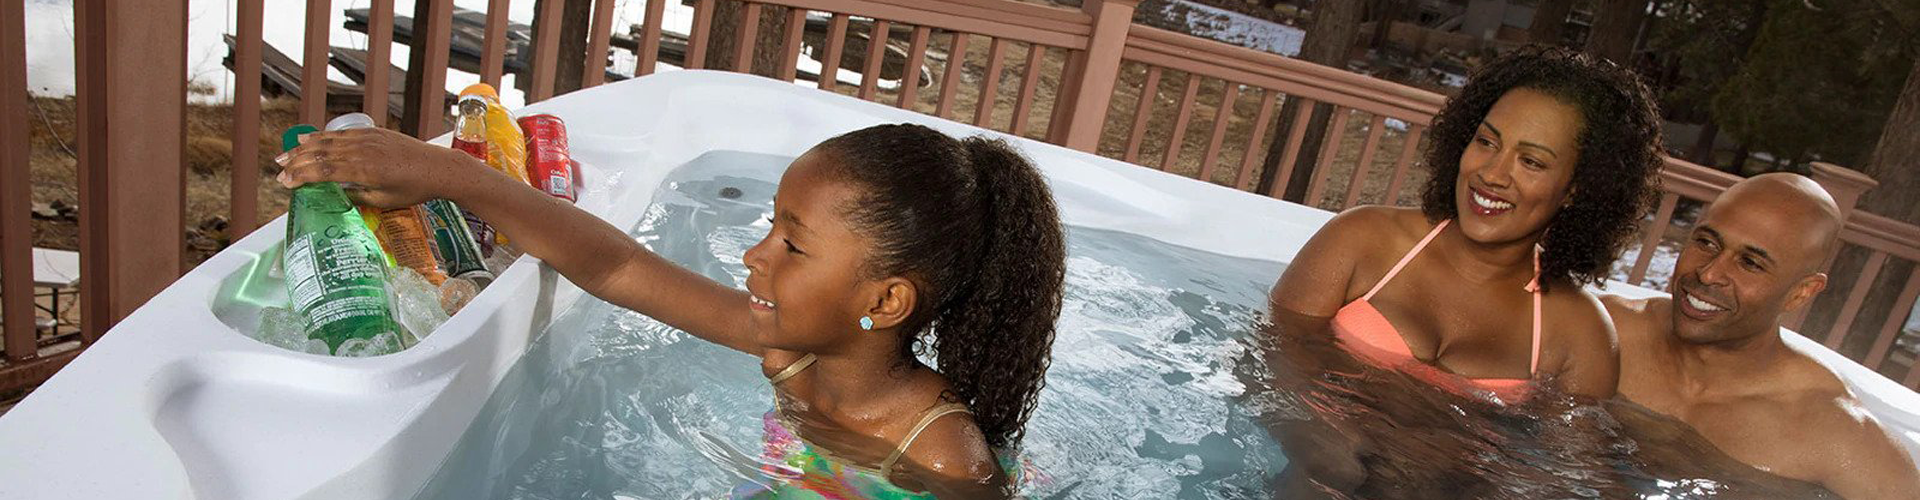 6 Benefits Of Using A Hot Tub